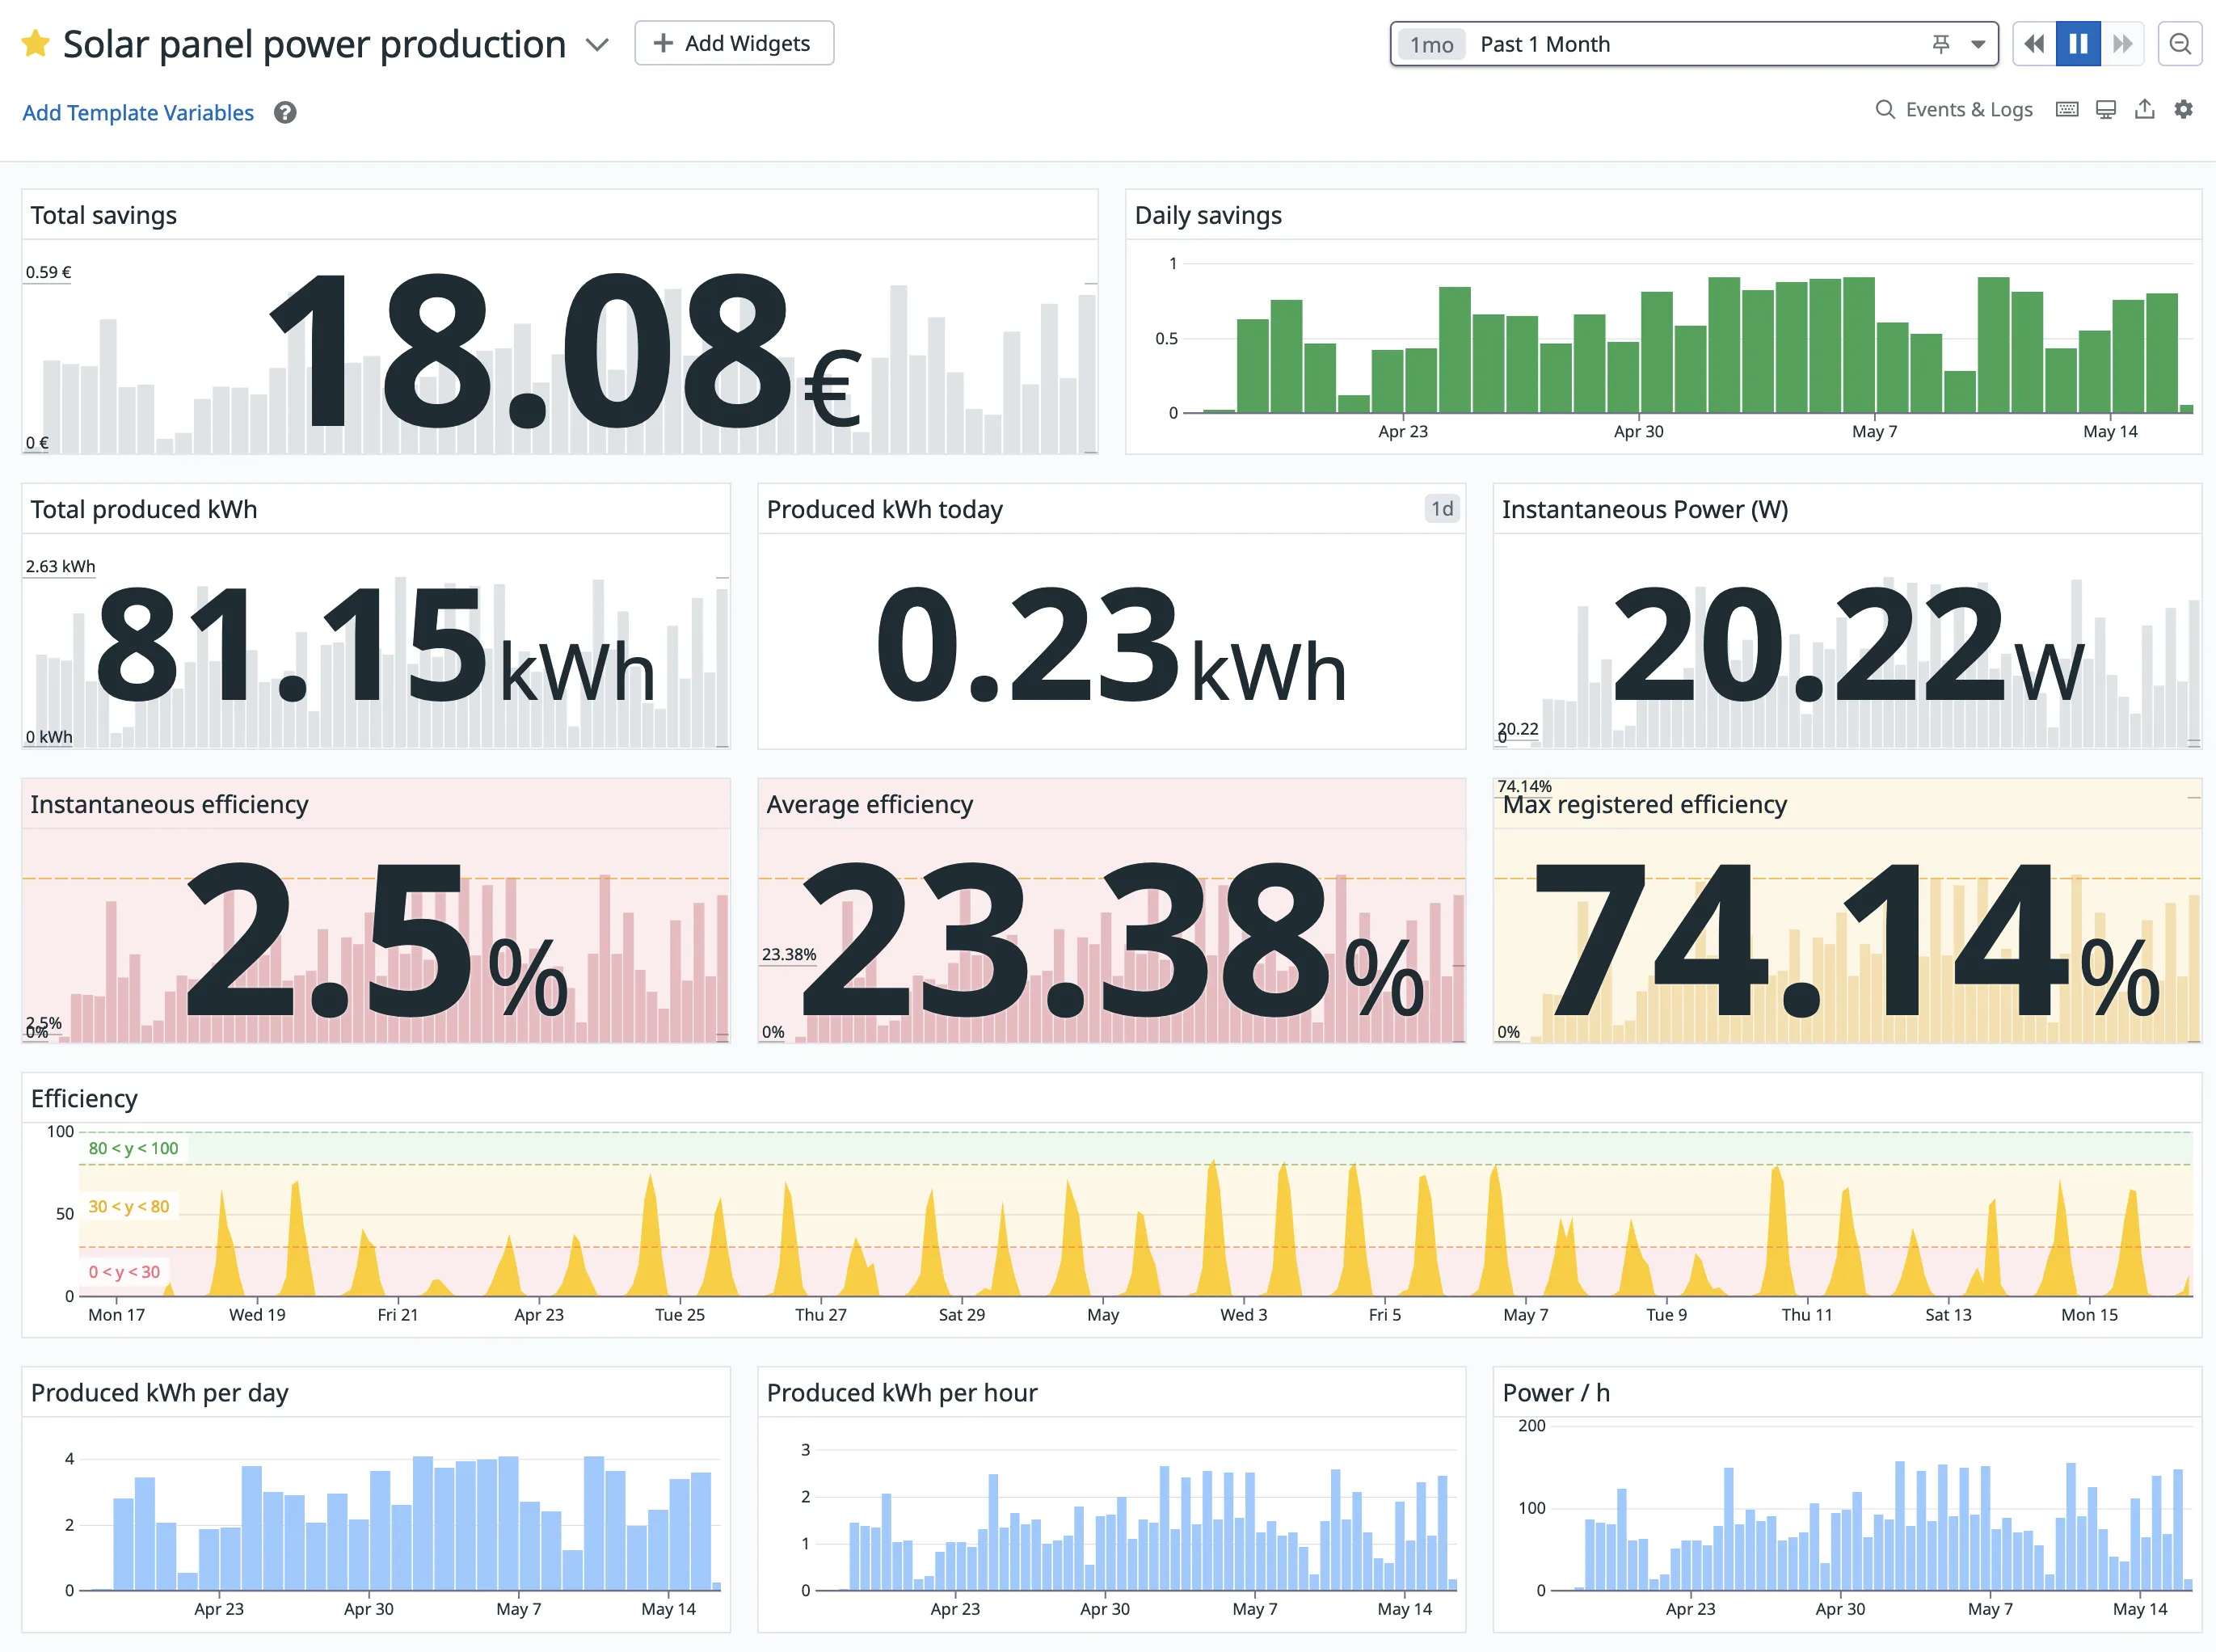 Dashboard detailing electricity production over time